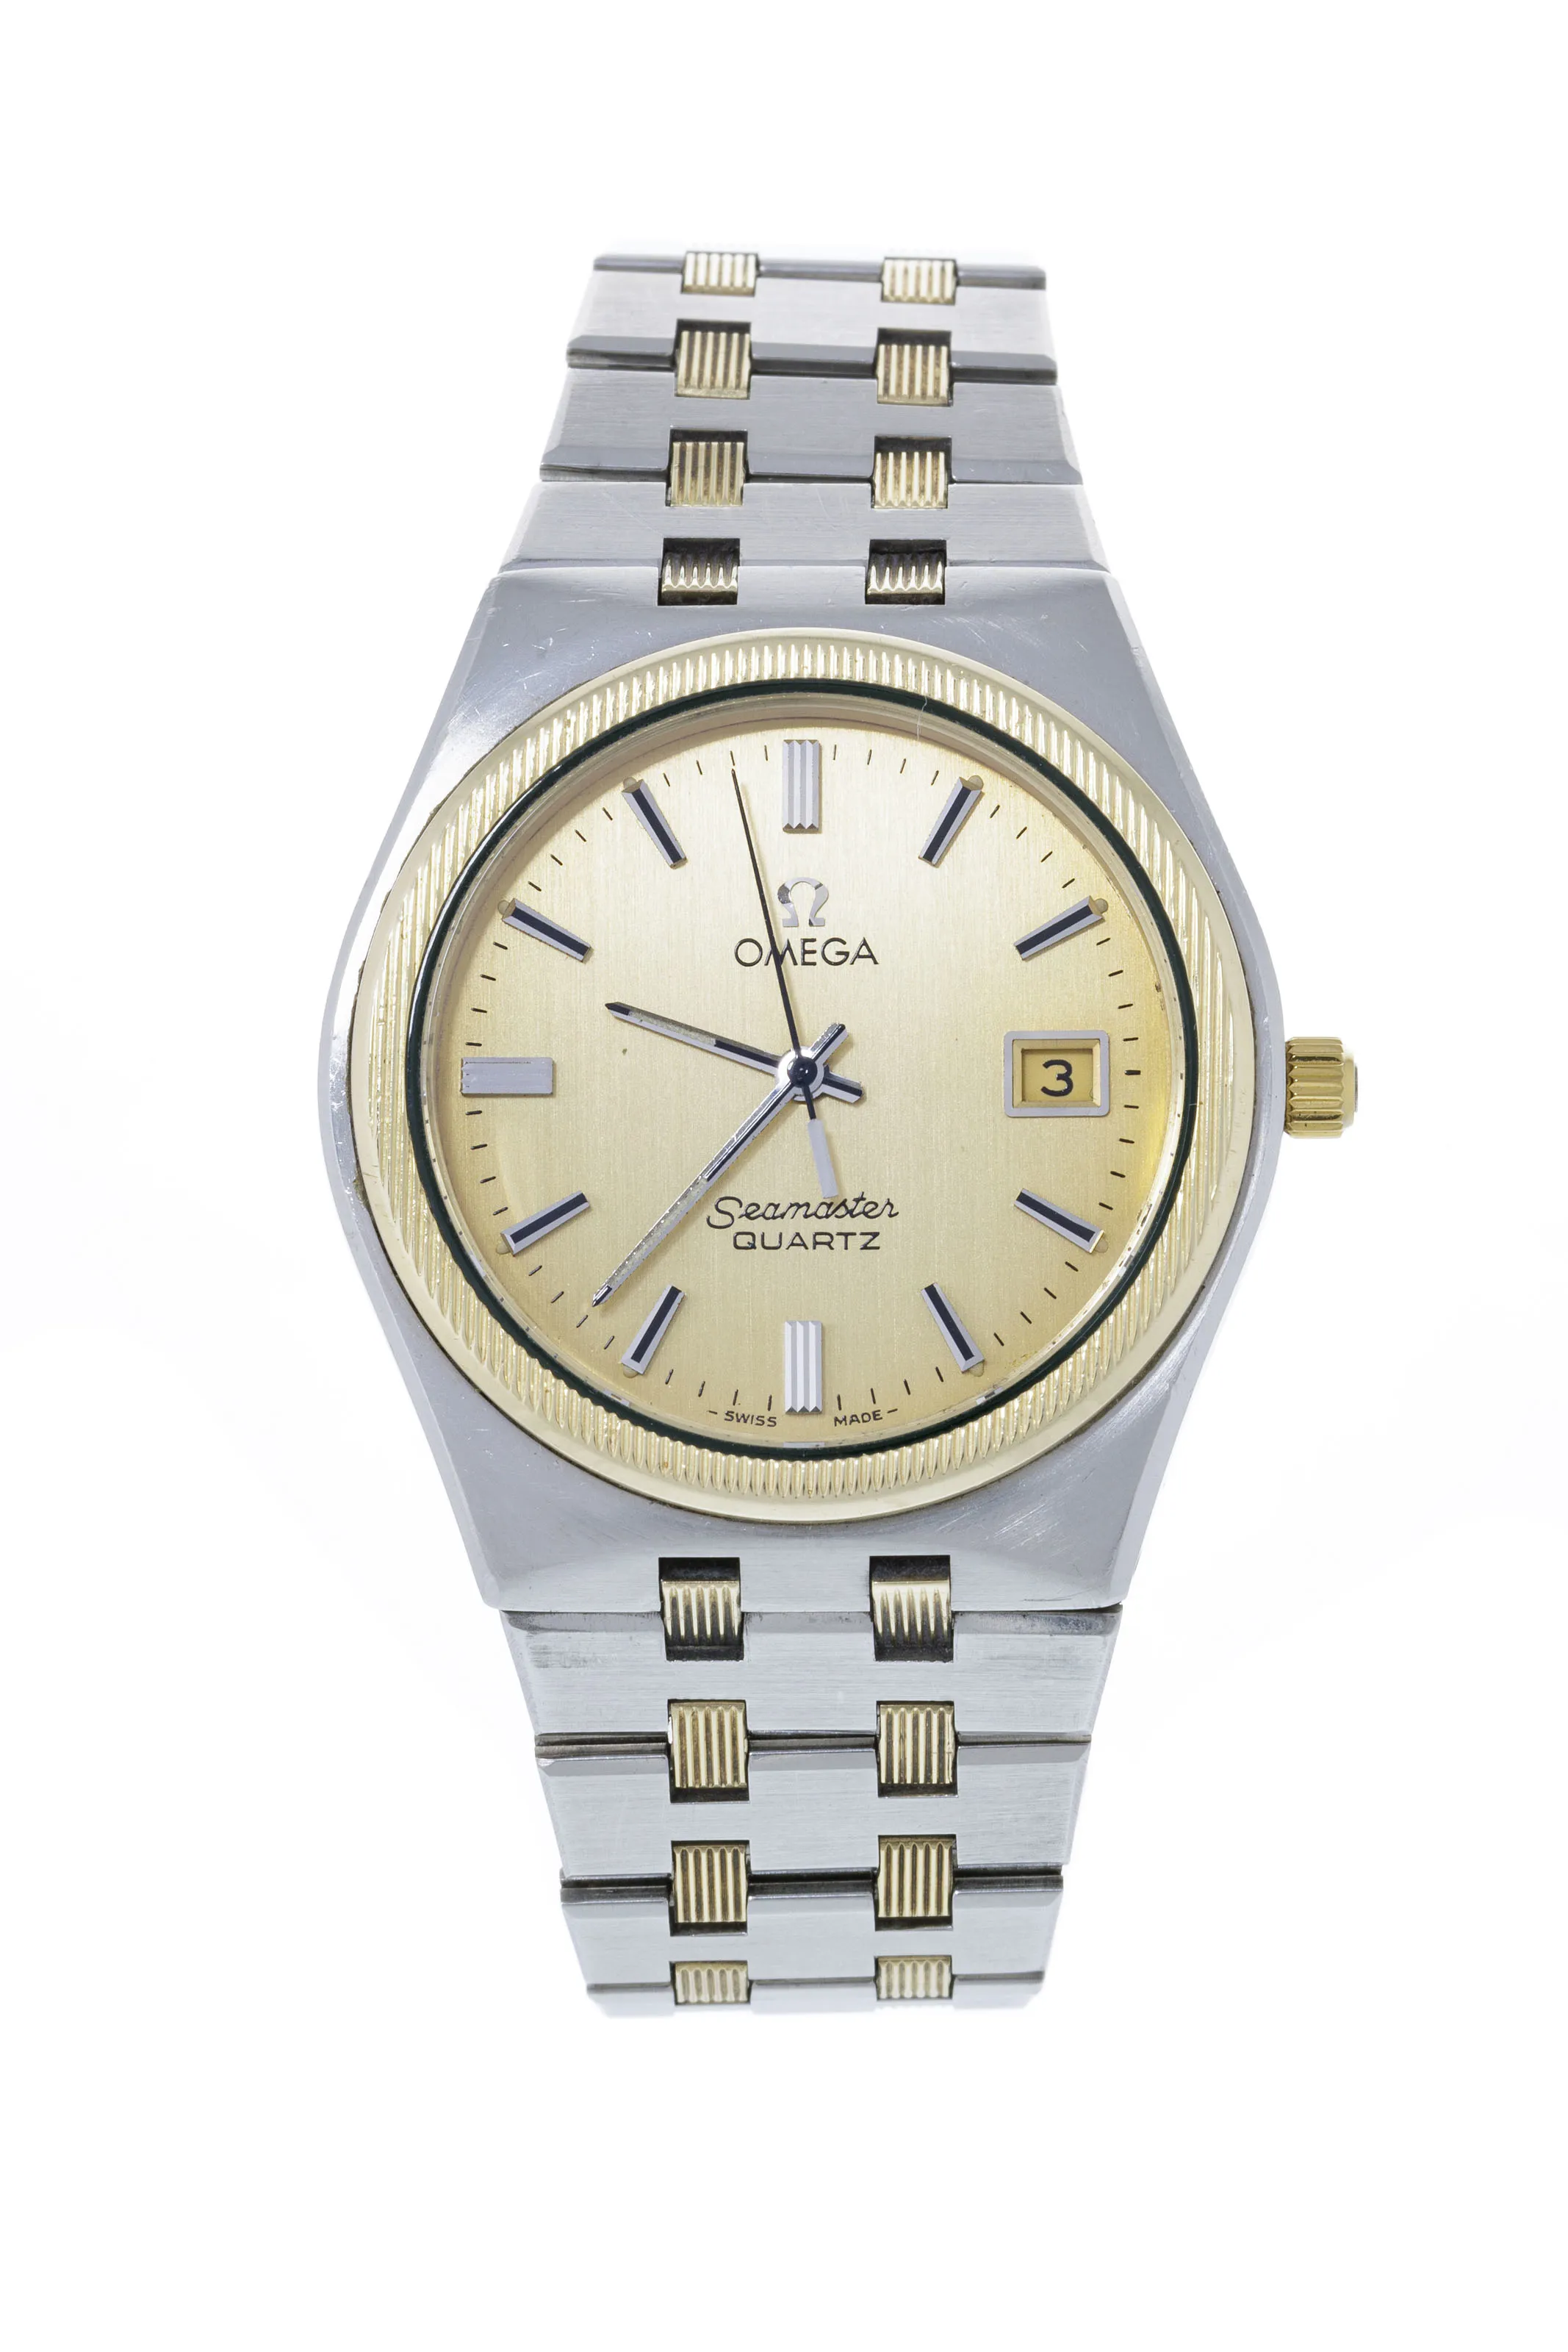 Omega Seamaster 196.0134/396.0873 37mm Yellow gold and stainless steel Golden